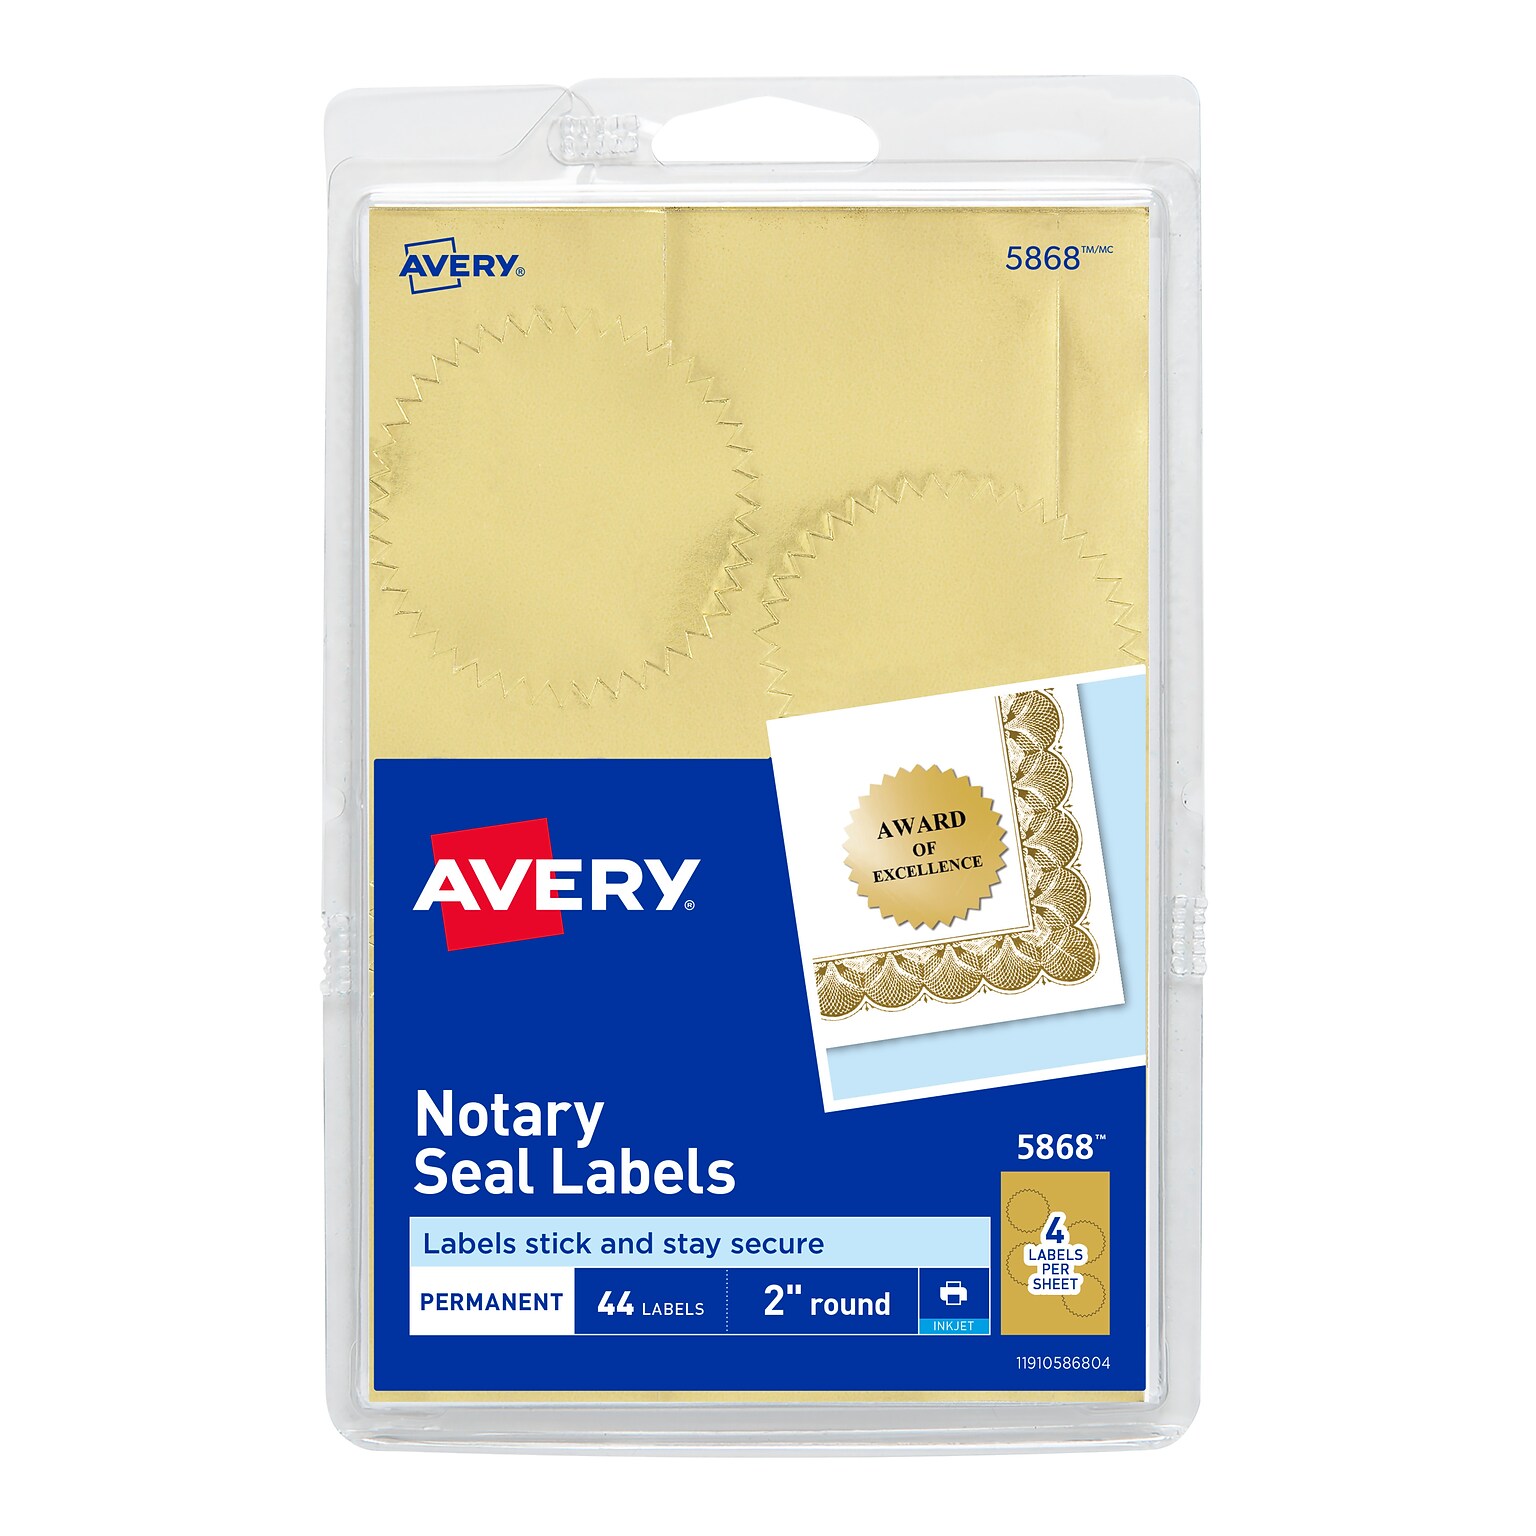 Avery Printable Inkjet Notary Seal Labels, 2 Diameter, Gold Foil, 4 Seals/Sheet, 11 Sheets/Pack, 44 Seals/Pack (5868)